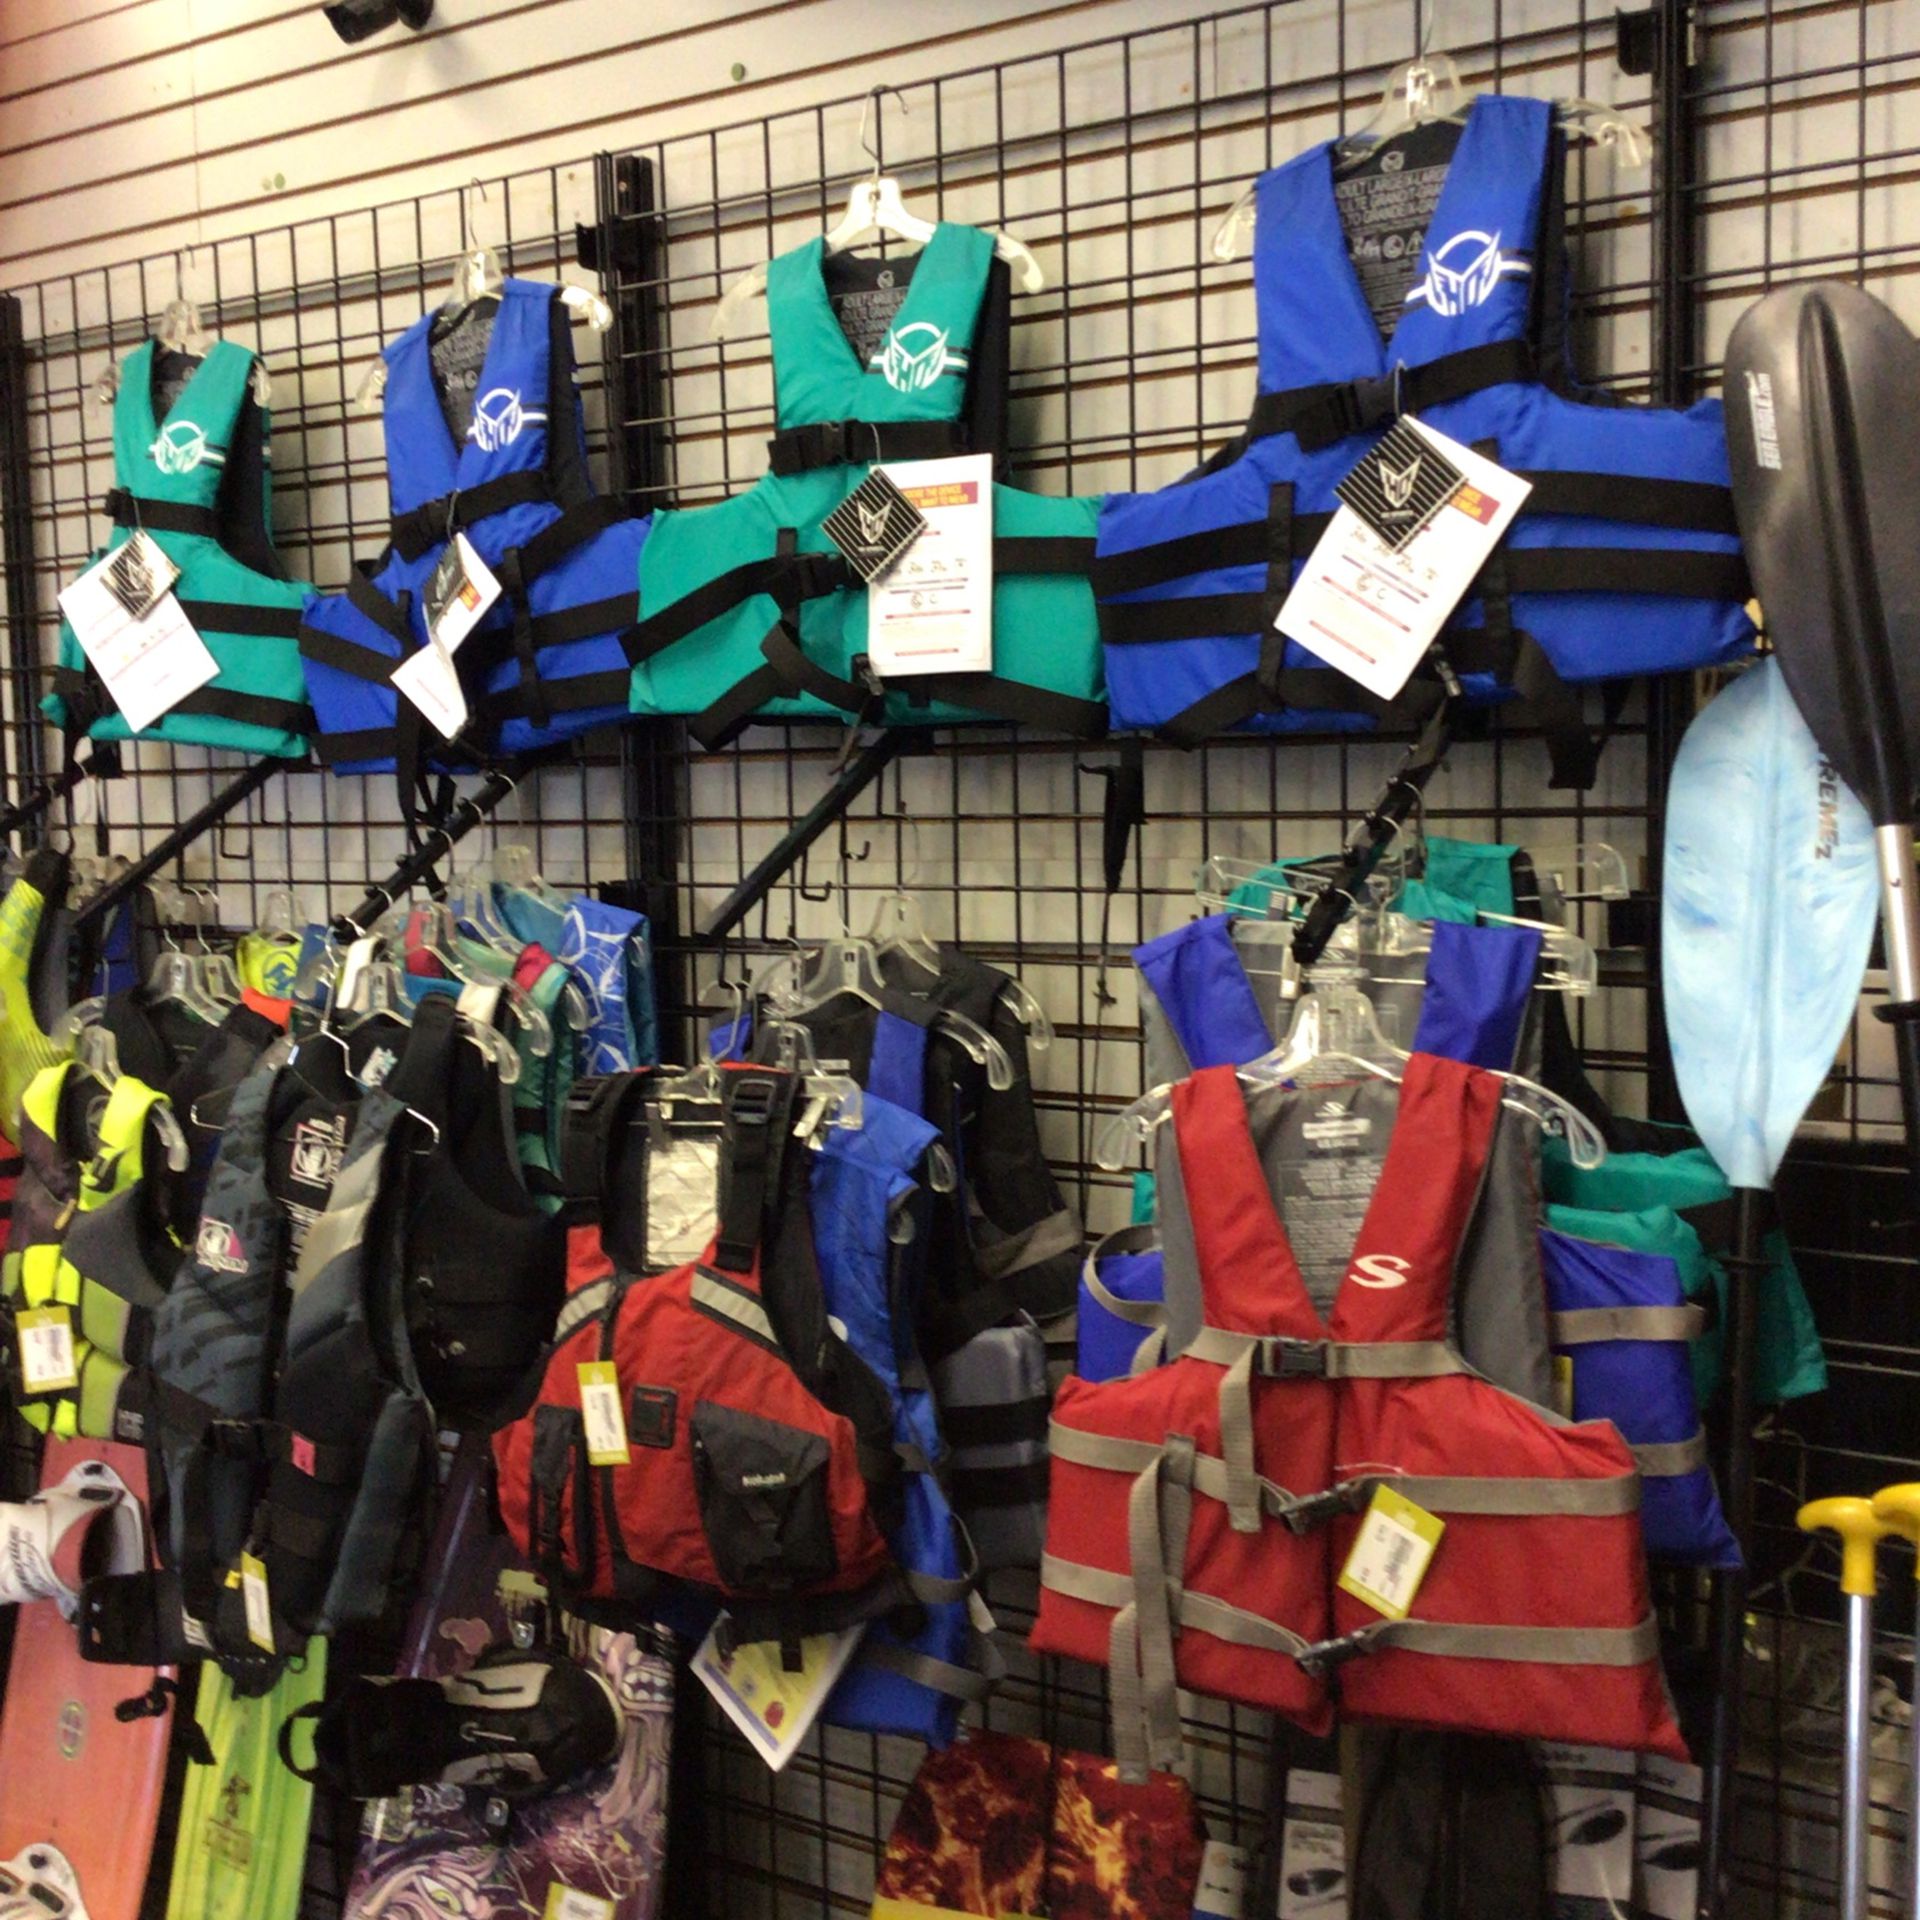 Life Vest New & Used For Adults & Kids Price Range $11.99 - $49.99